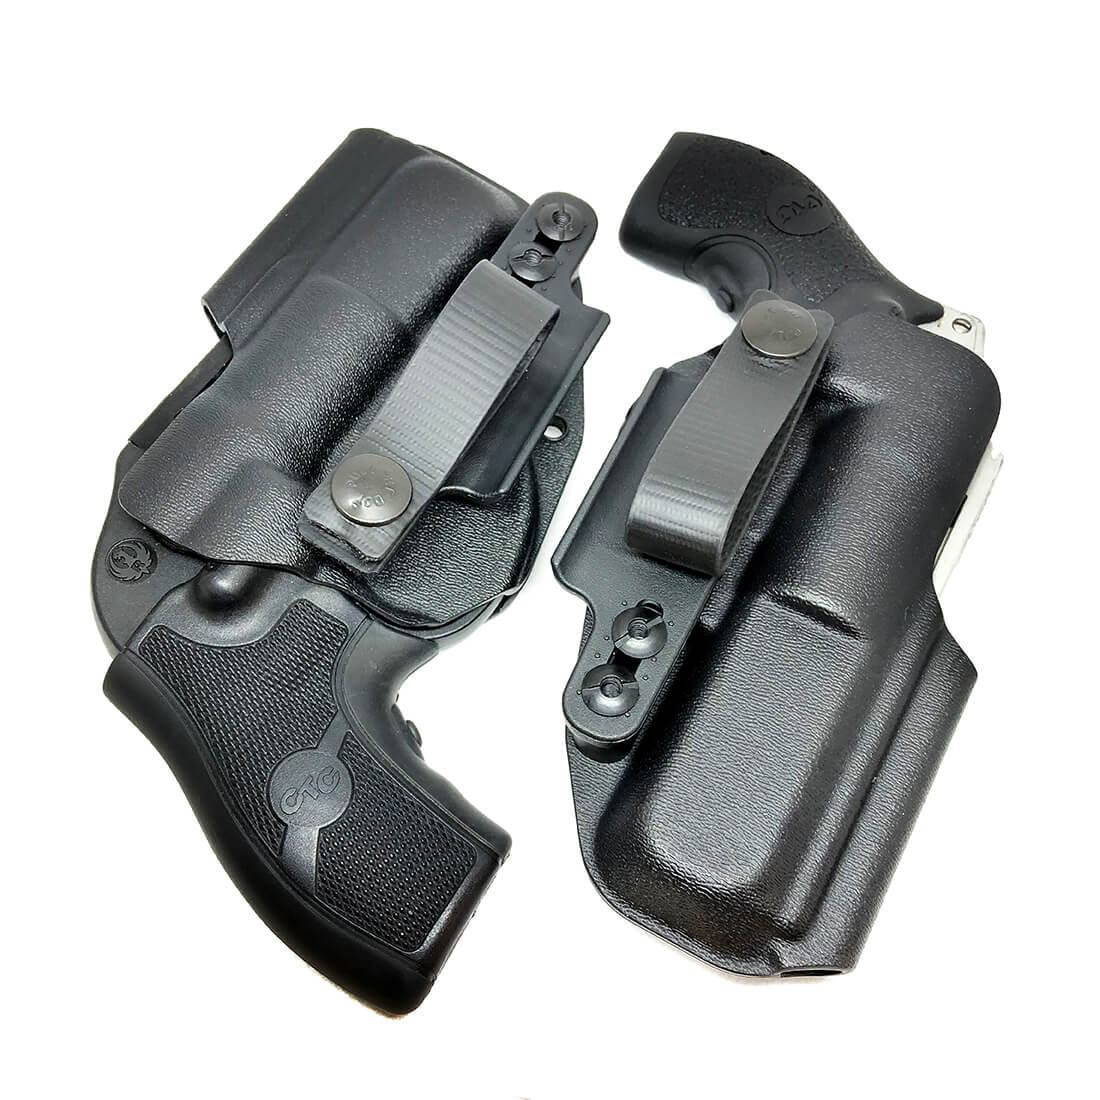 City Special Revolver  Holster  PHLSTER Kydex Holsters  and 